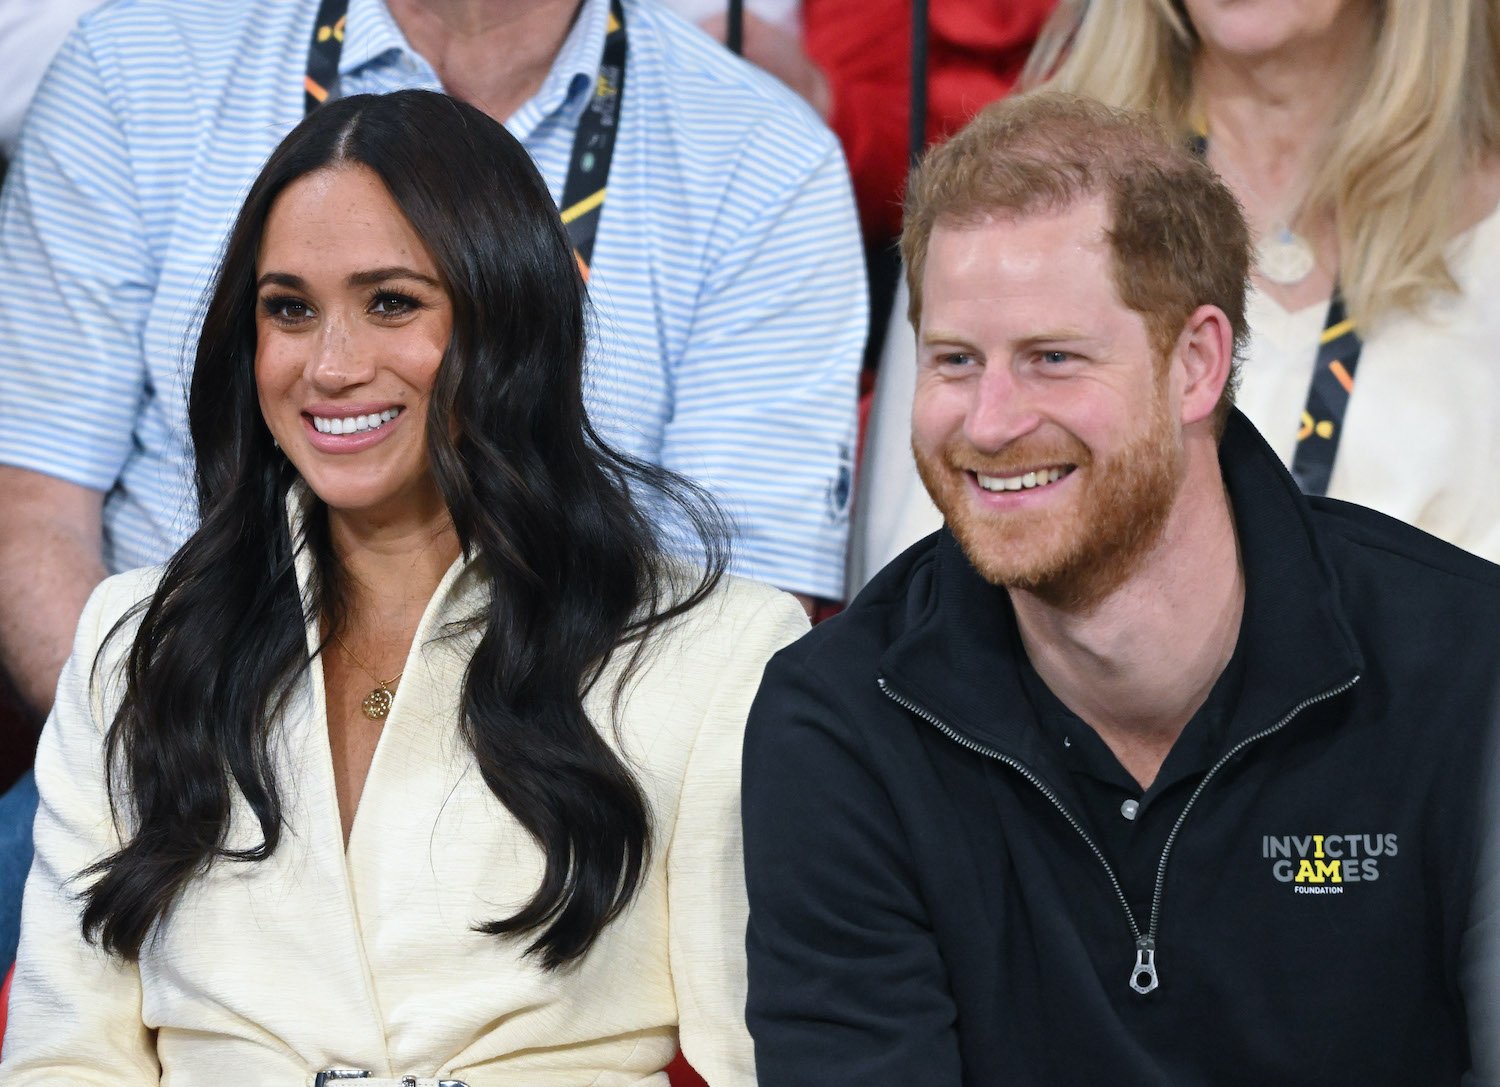 Prince Harry wears a black half zip shirt and Meghan Markle wears a white jacket and smiles at the Invictus Games